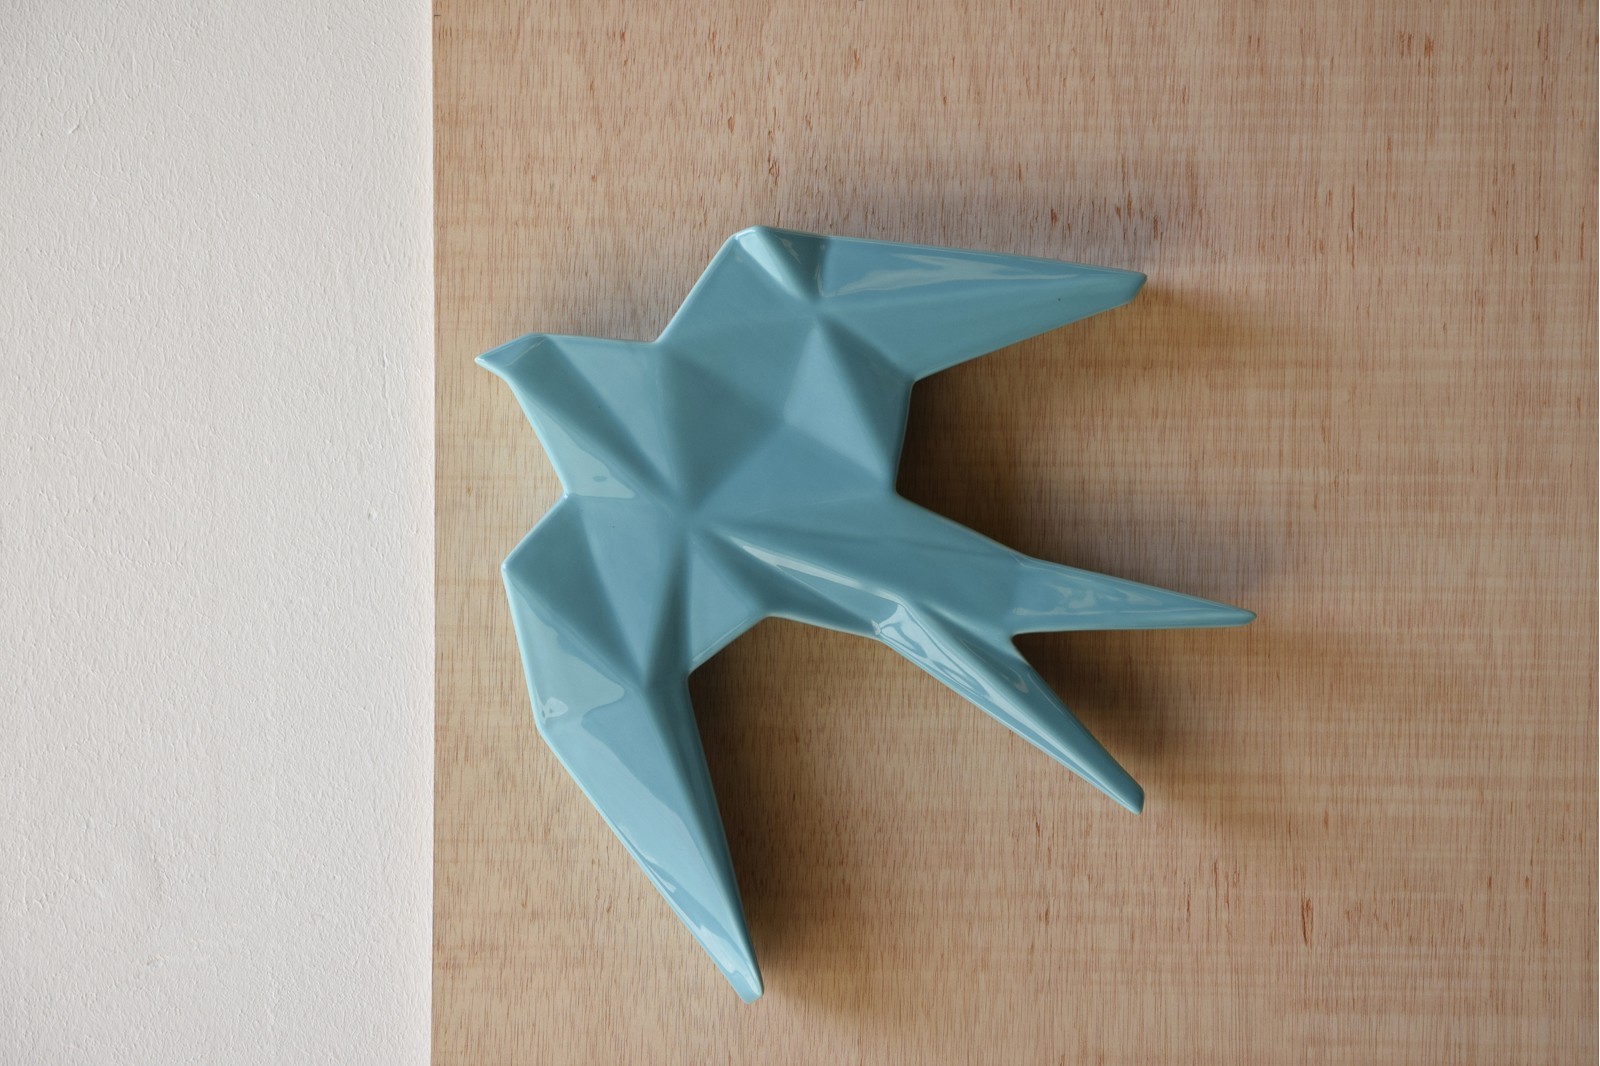 ANDURIÑA COLLECTION. GLOSSY BLUE CERAMIC WALL SCULPTURE